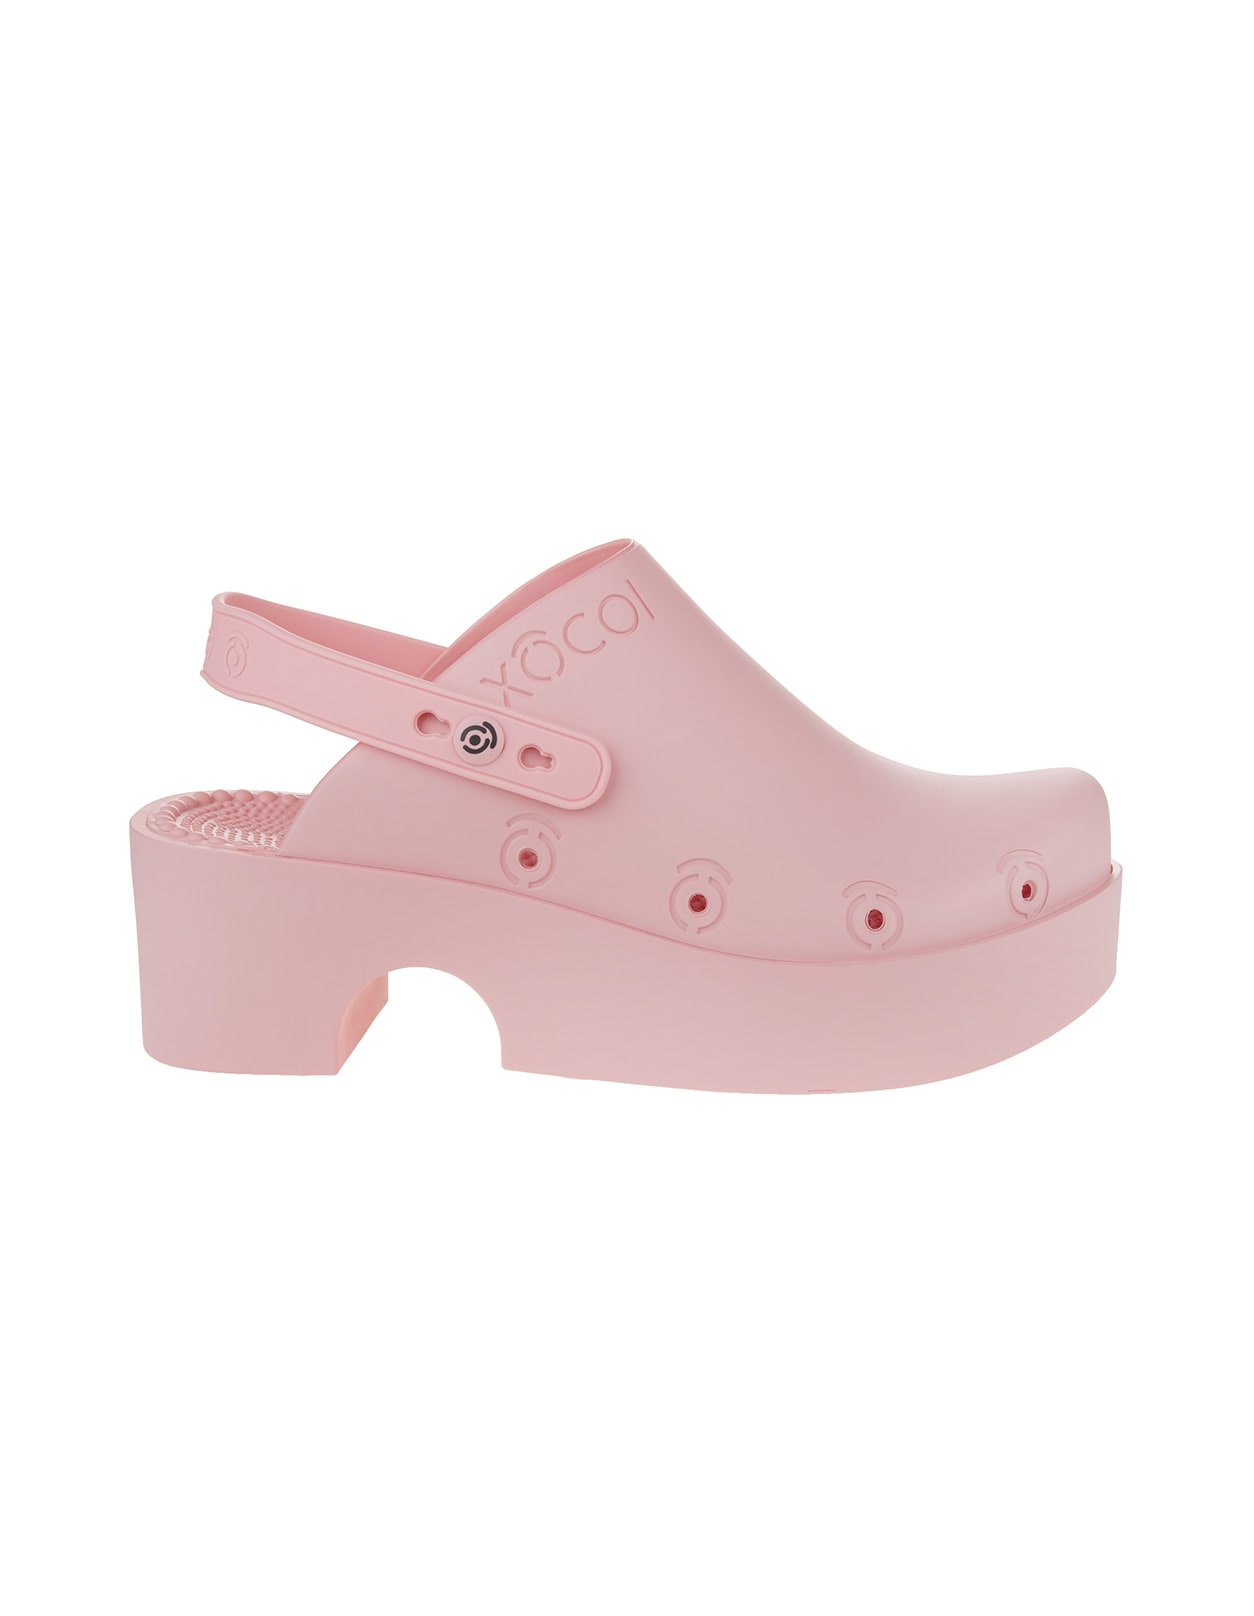 Xocoi Woman Slides In Pink Recycled Rubber With Logo